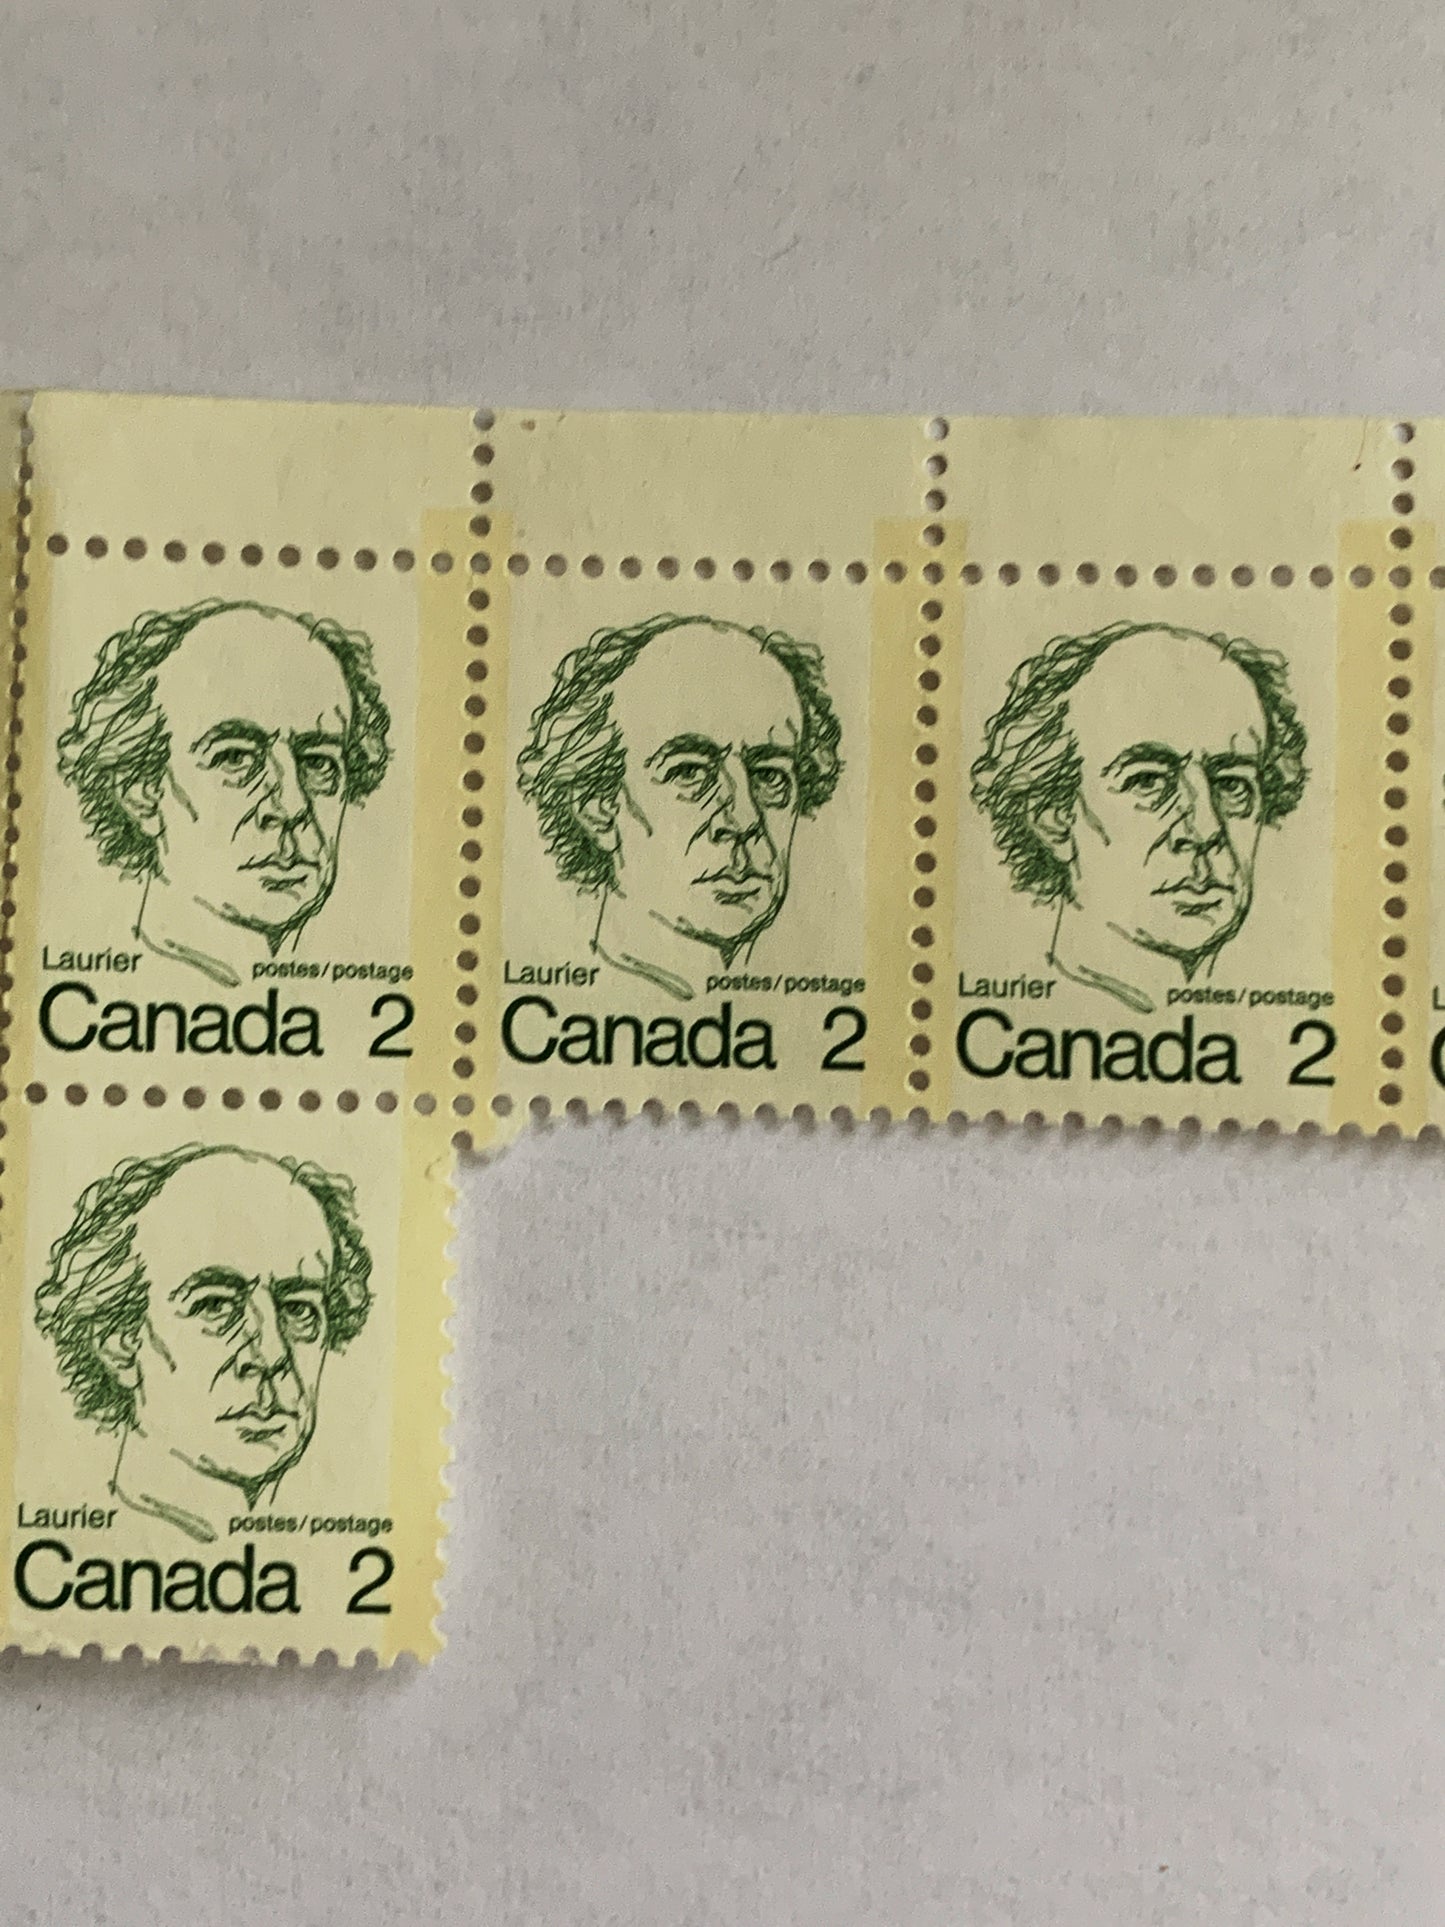 Wilfred Laurier Canadian 2 Cent Stamps 16 Stamps Top of Sheet